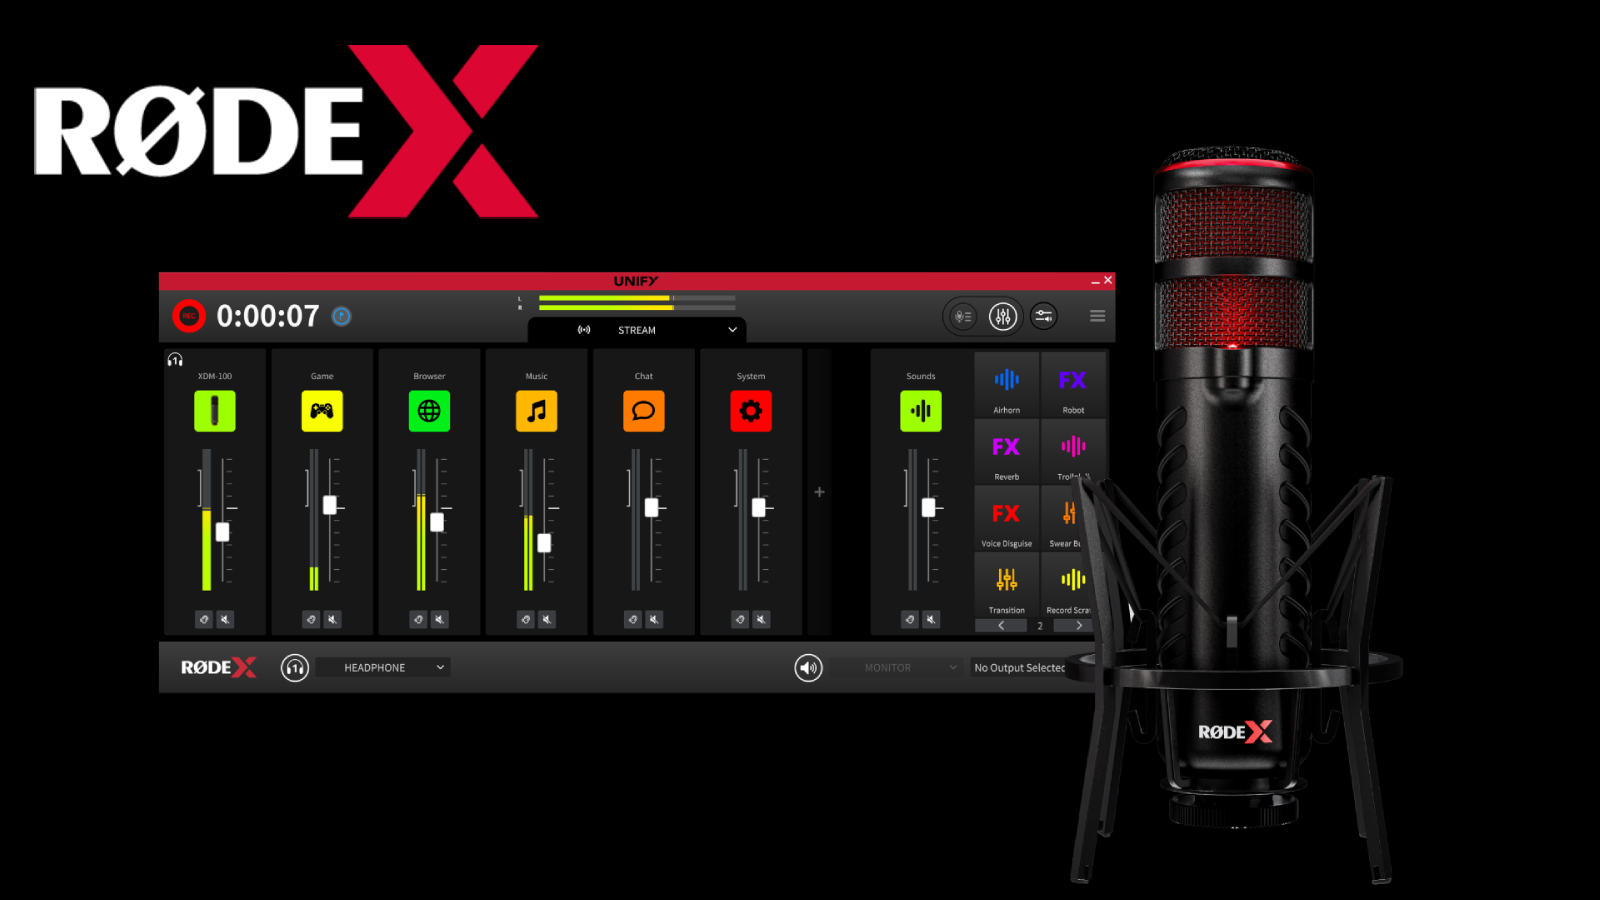 Rode X revealed: Pro audio expertise comes to gamers and streamers